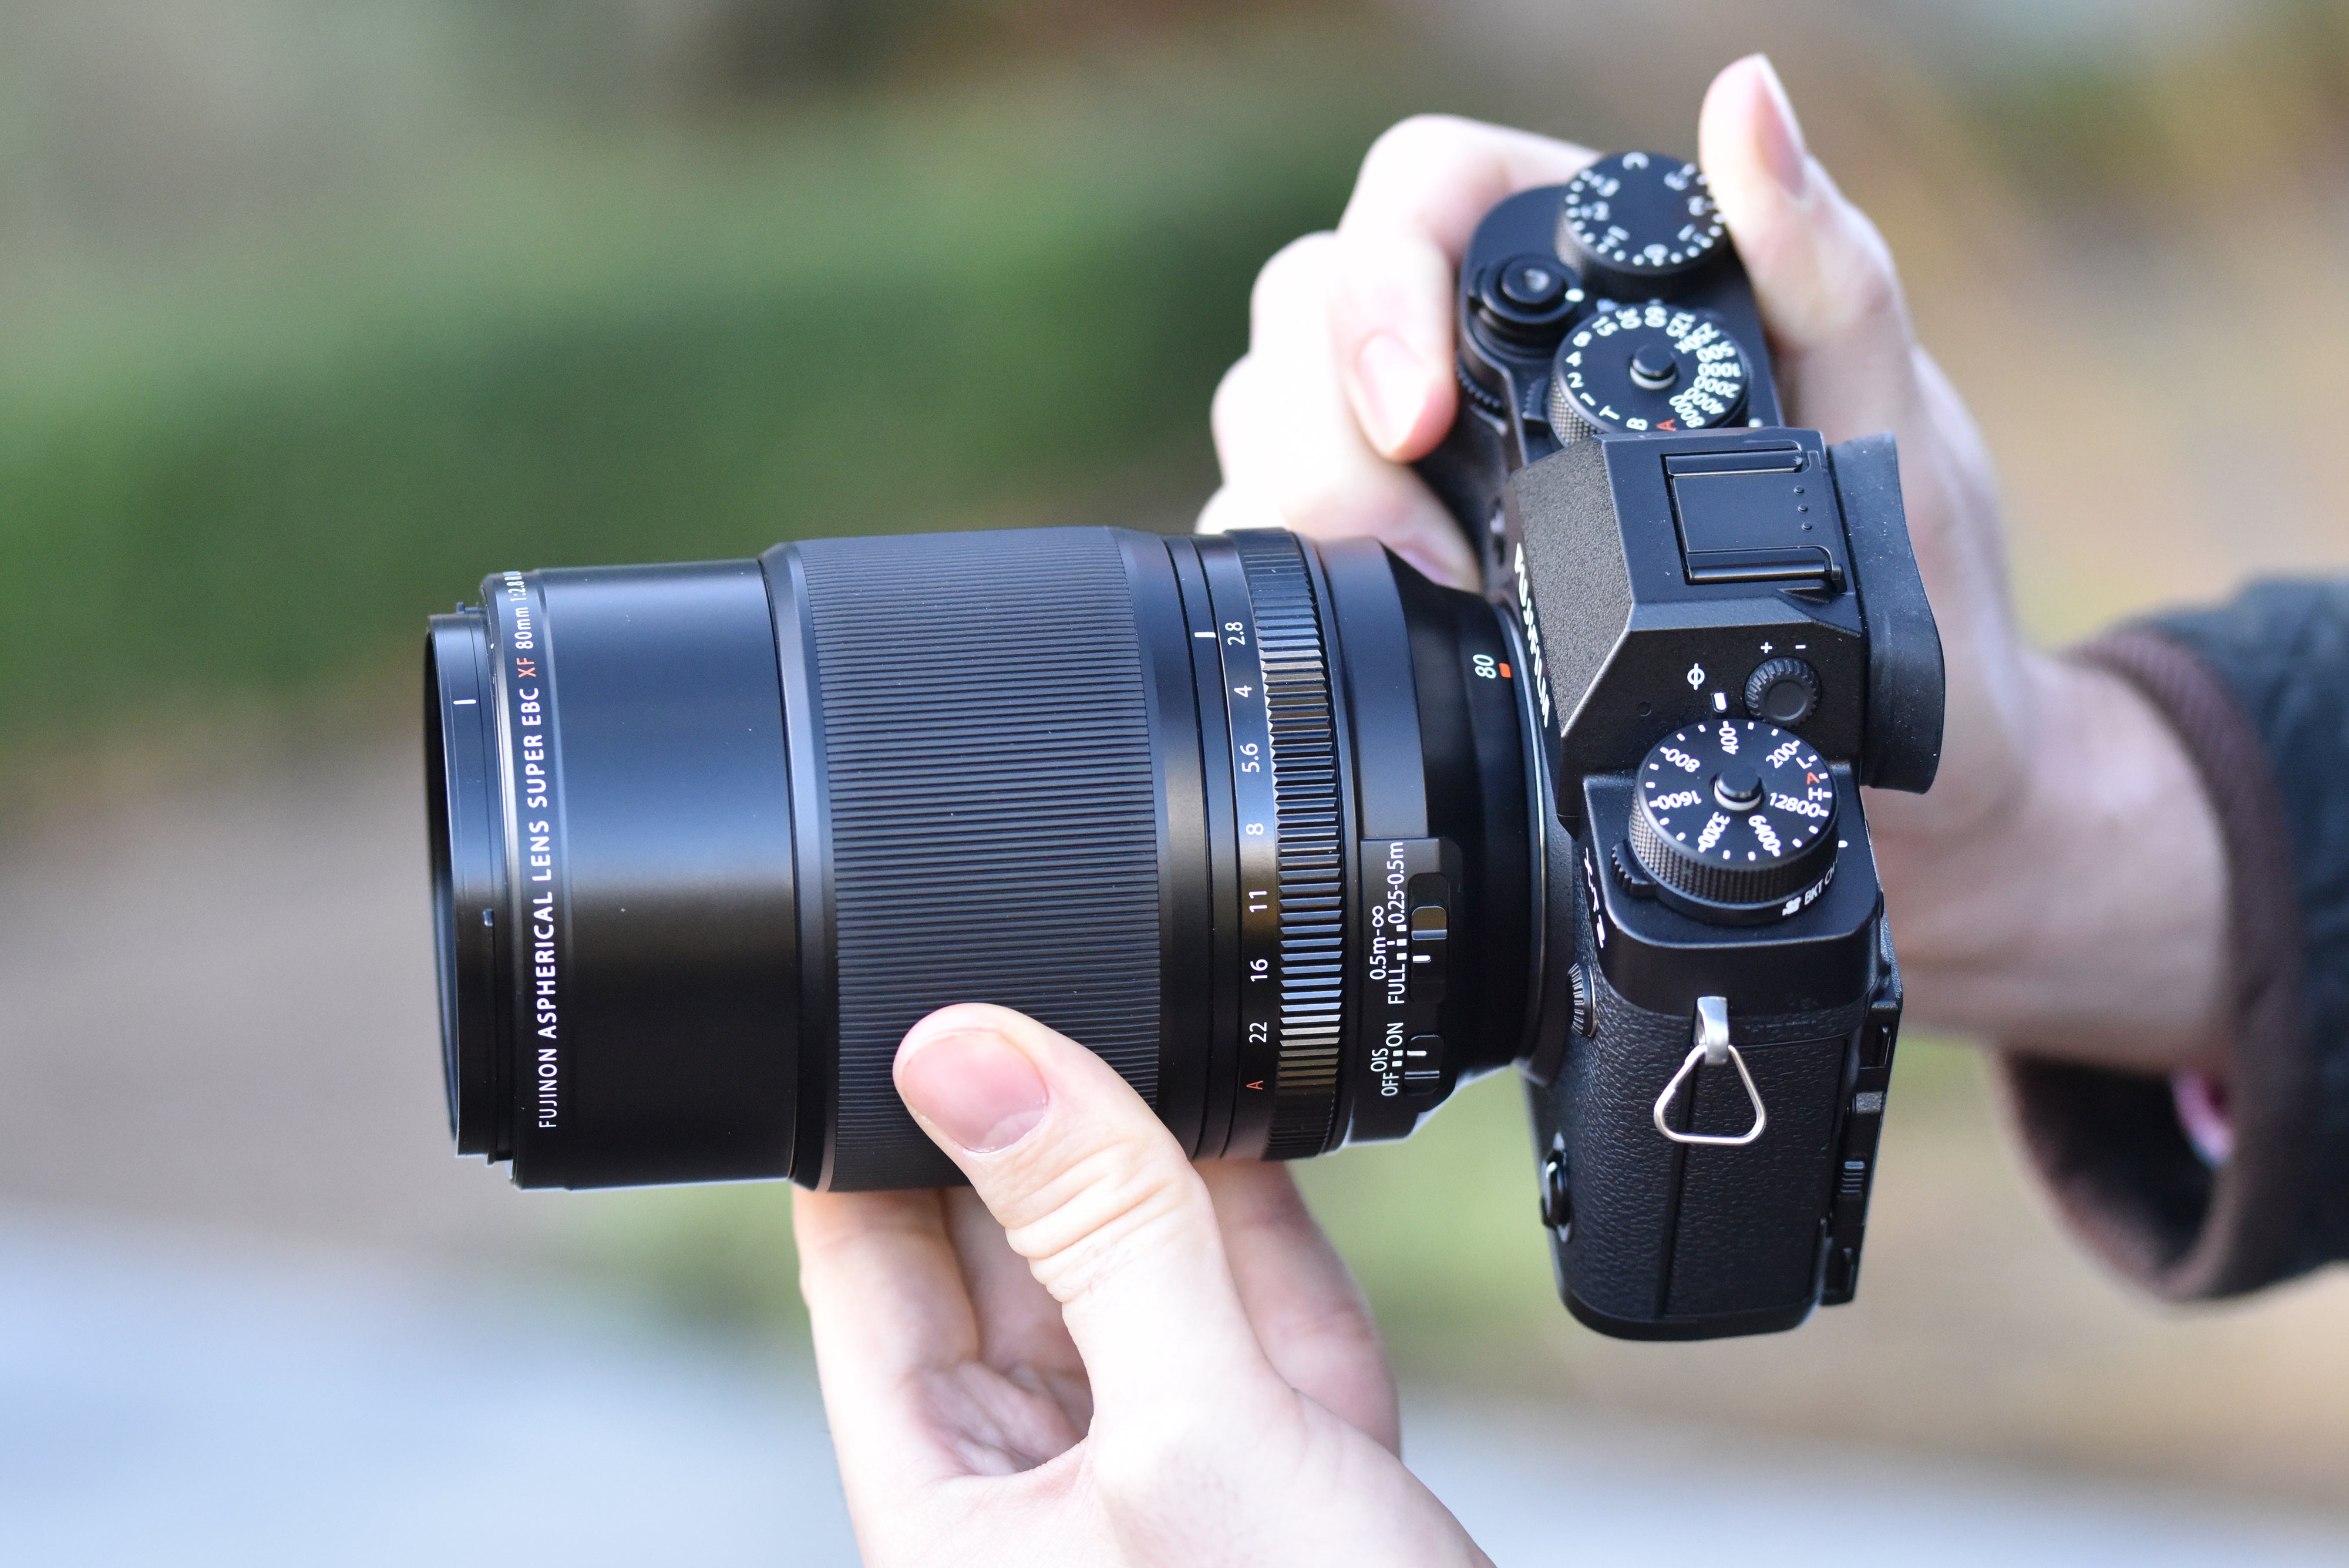 Fujinon XF 80mm f/2.8 R LM OIS WR Macro Review | Trusted Reviews